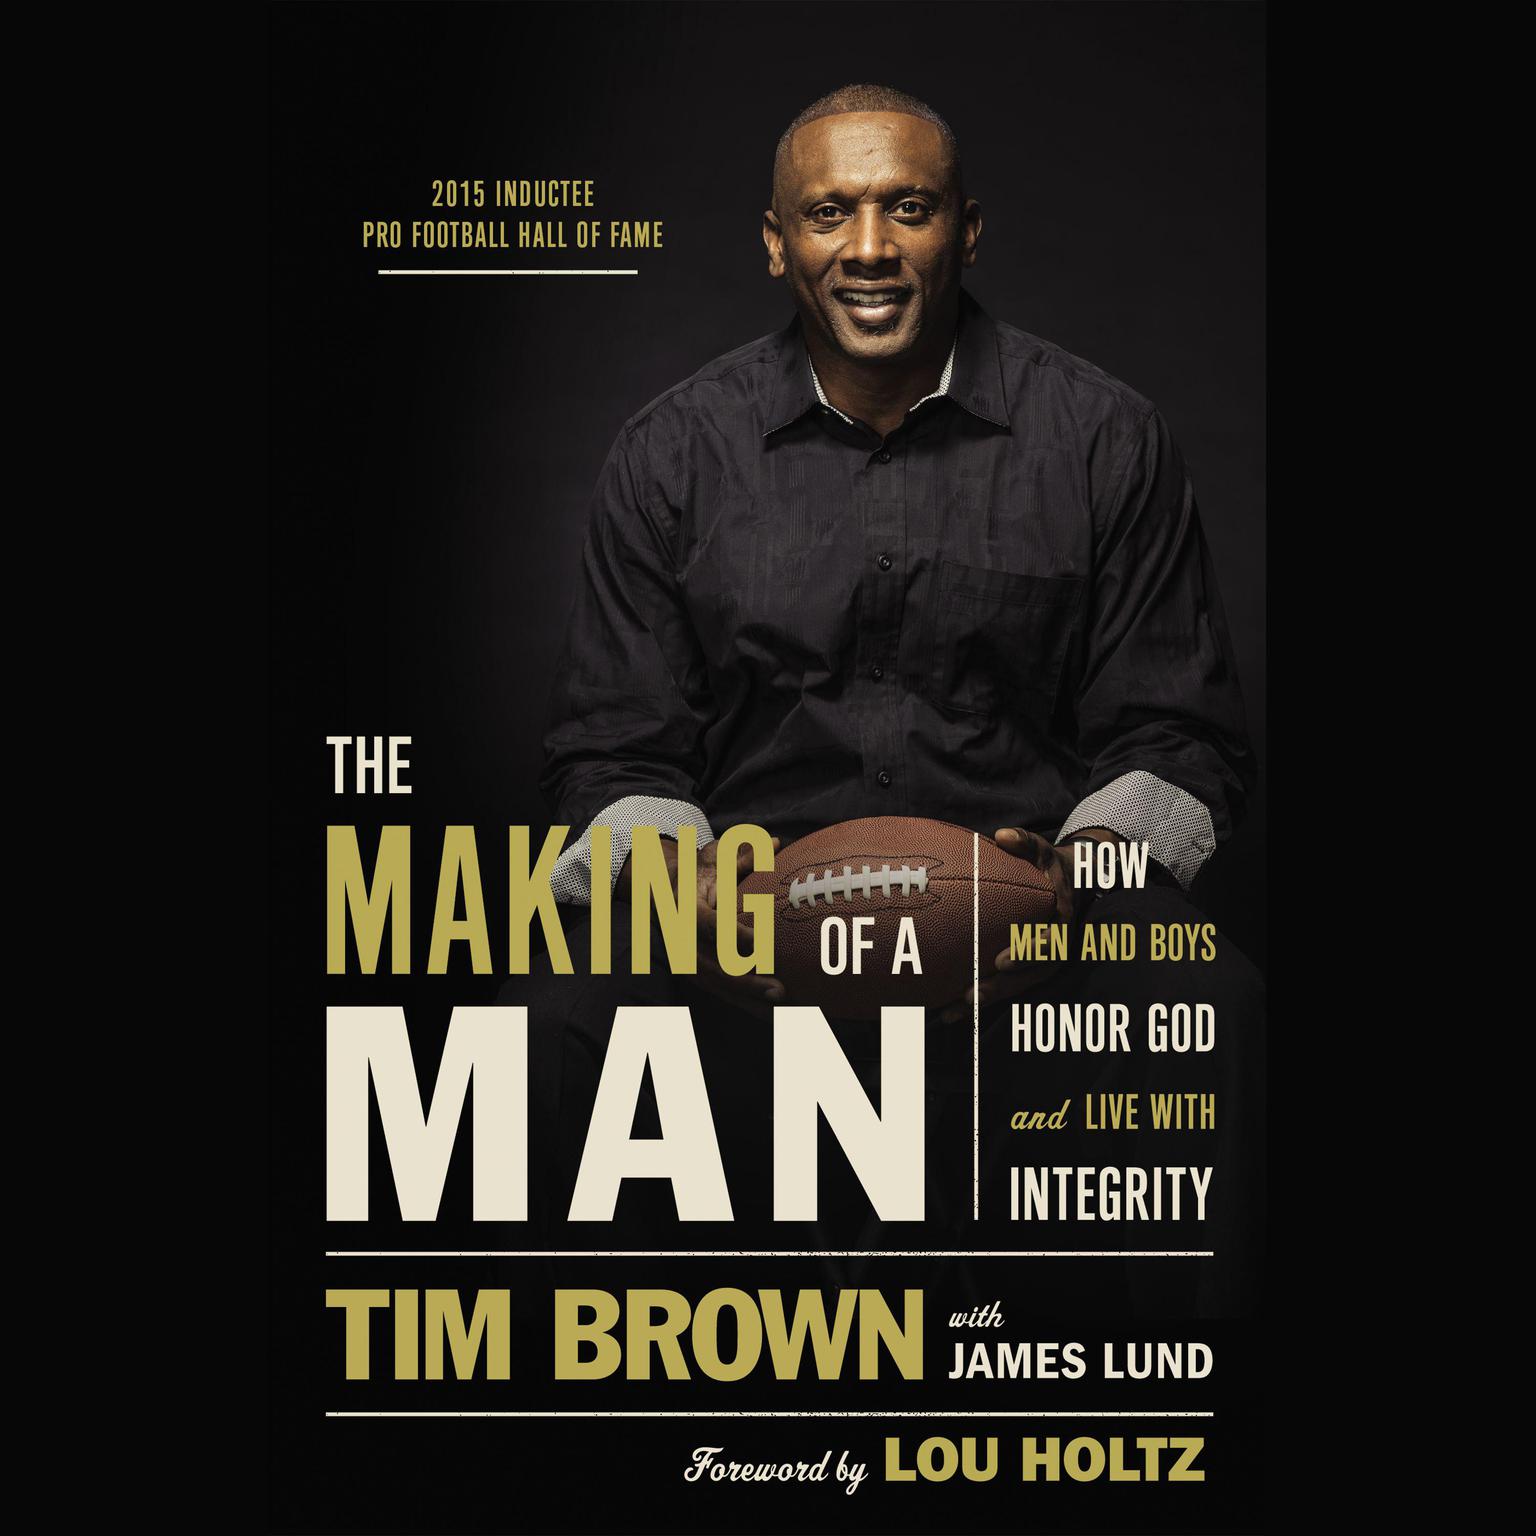 The Making of a Man: How Men and Boys Honor God and Live with Integrity Audiobook, by Tim Brown